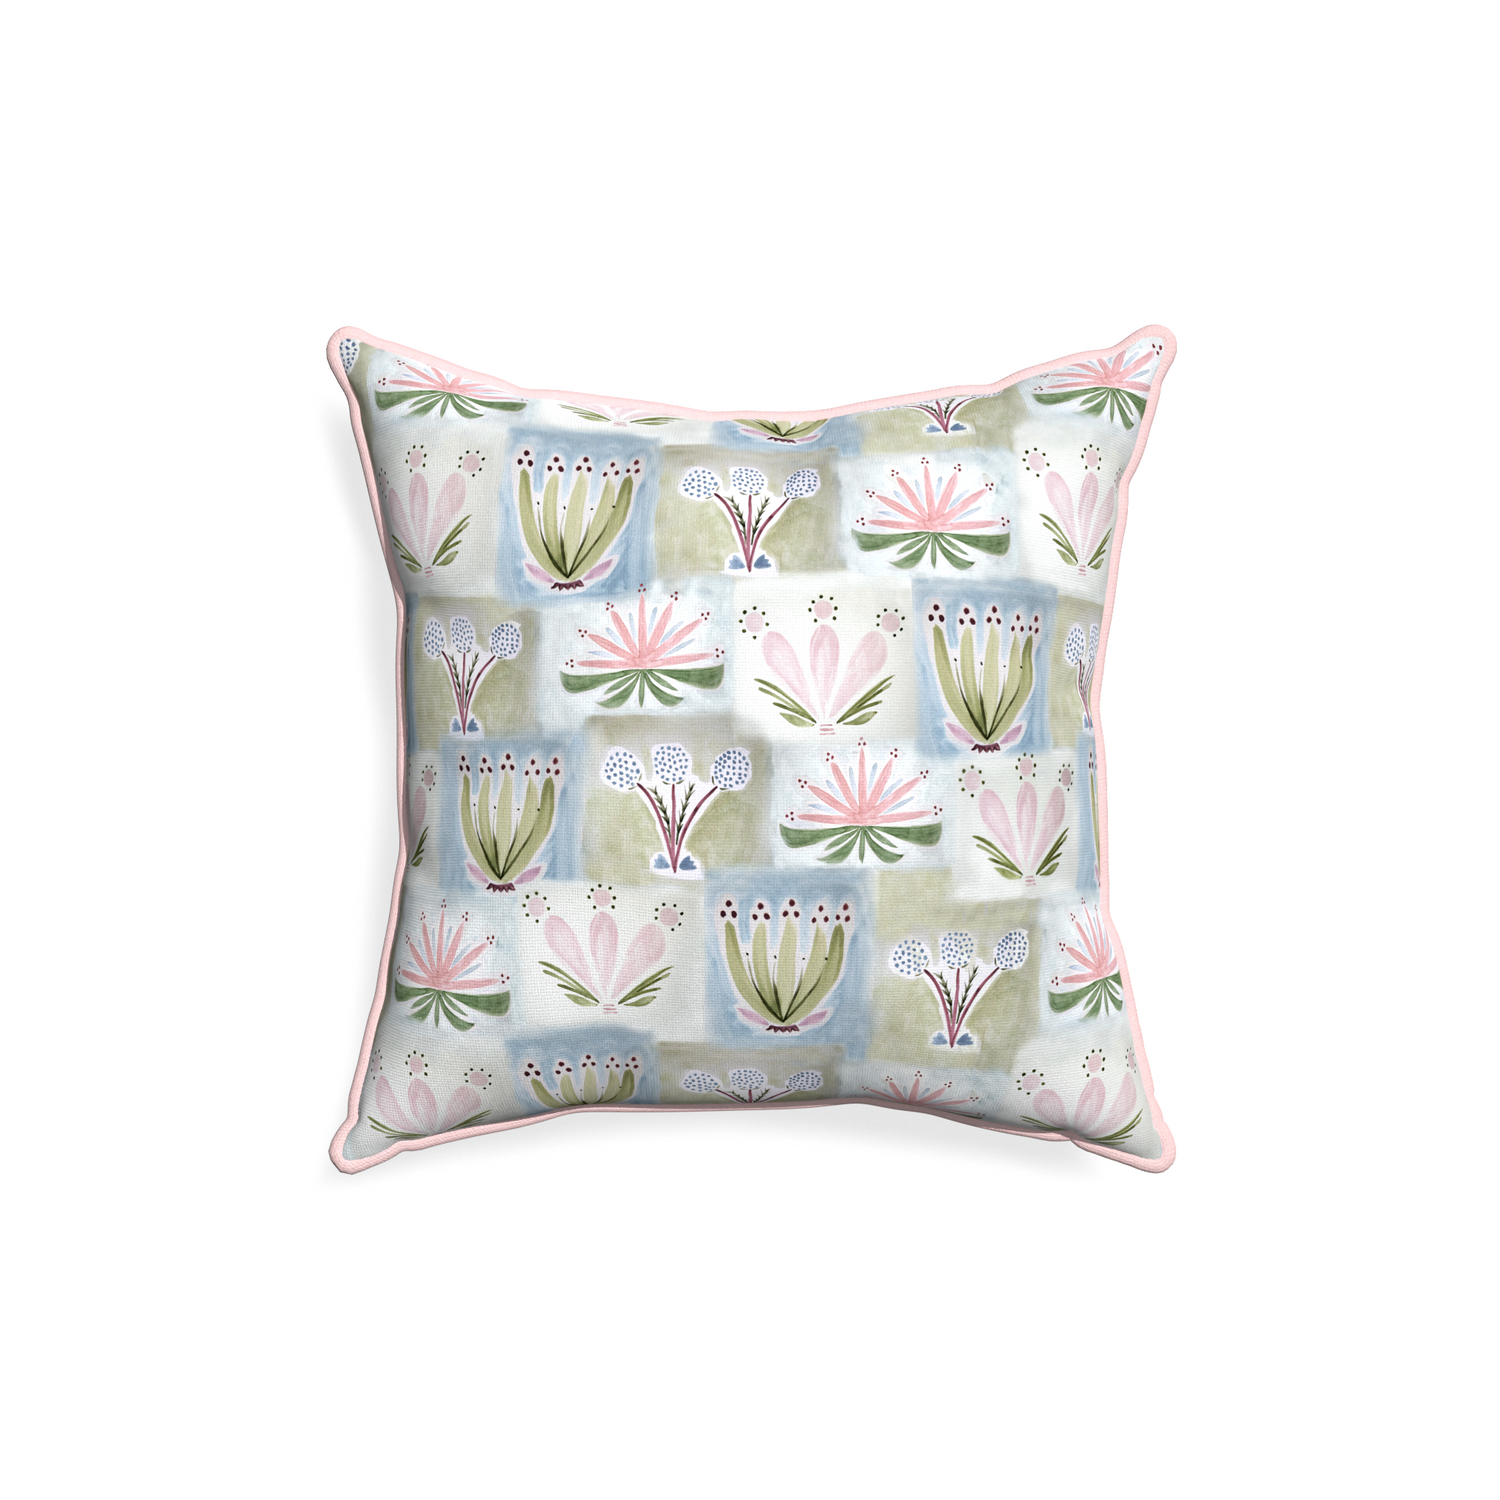 18-square harper custom hand-painted floralpillow with petal piping on white background